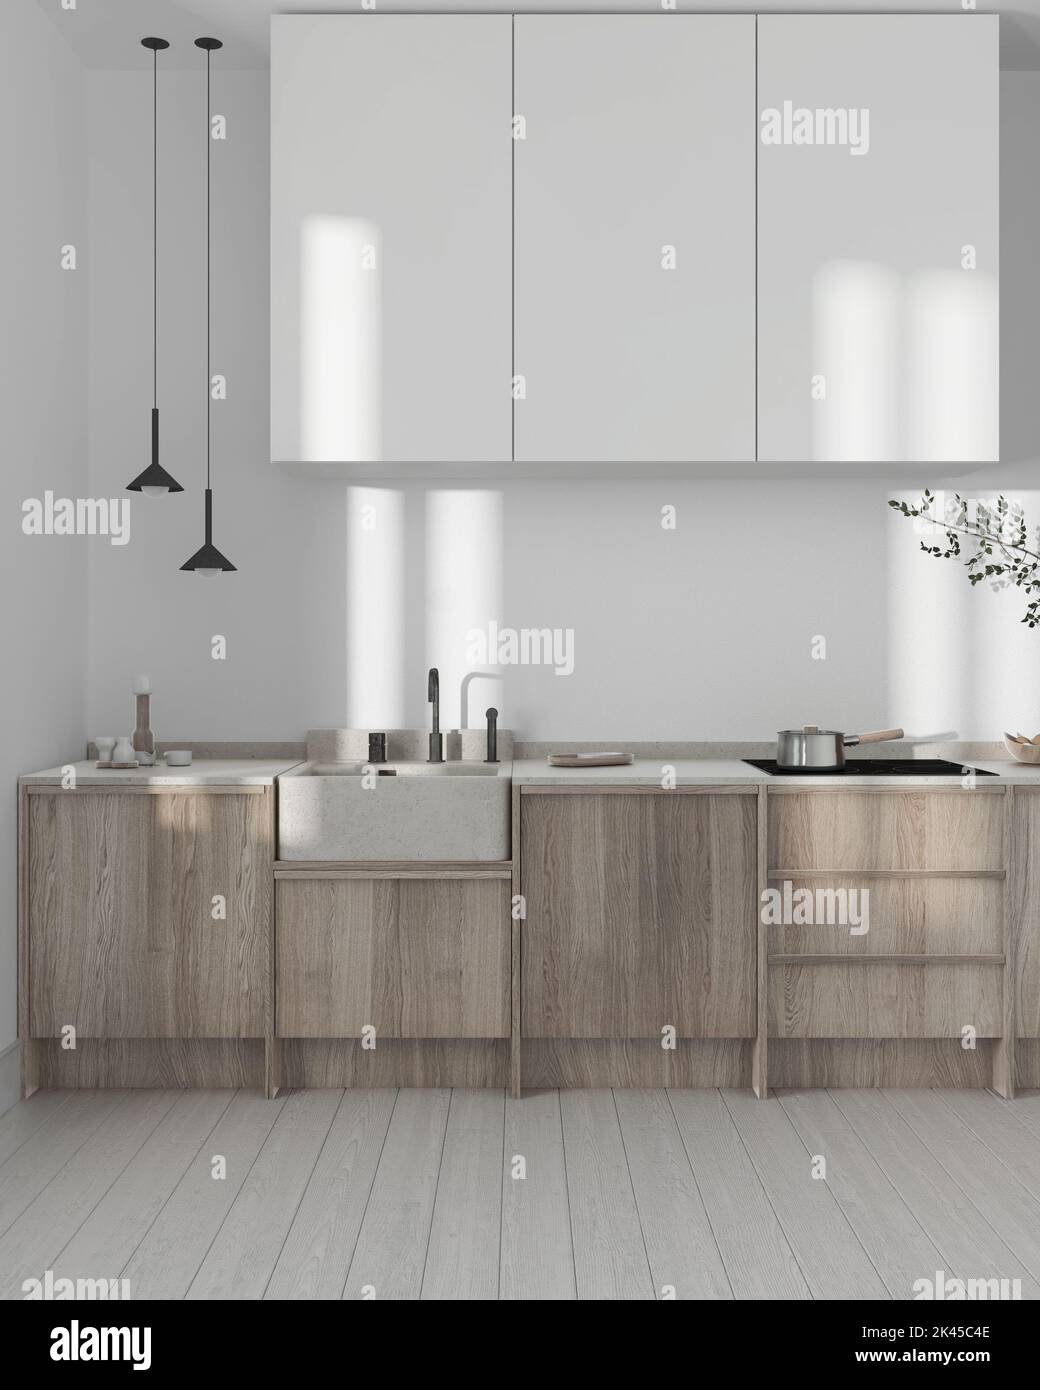 https://c8.alamy.com/comp/2K45C4E/japandi-wooden-kitchen-in-white-and-bleached-tones-wooden-cabinets-contemporary-wallpaper-and-marble-top-front-view-minimalist-interior-design-2K45C4E.jpg